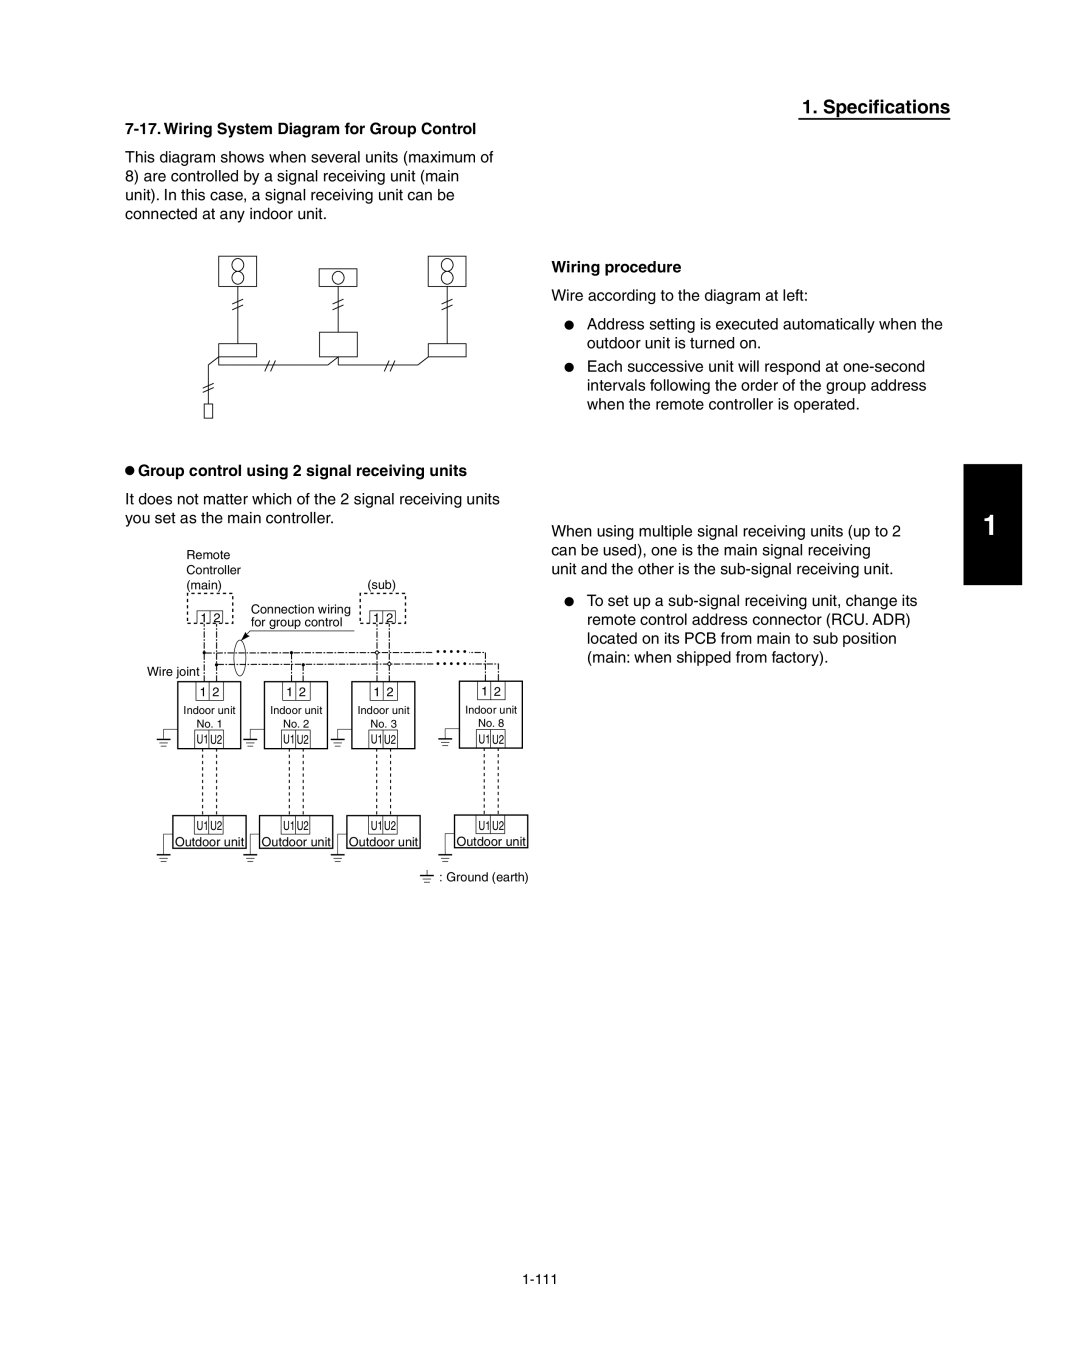 Panasonic R410A Specifications, Wiring System Diagram for Group Control, Group control using 2 signal receiving units 